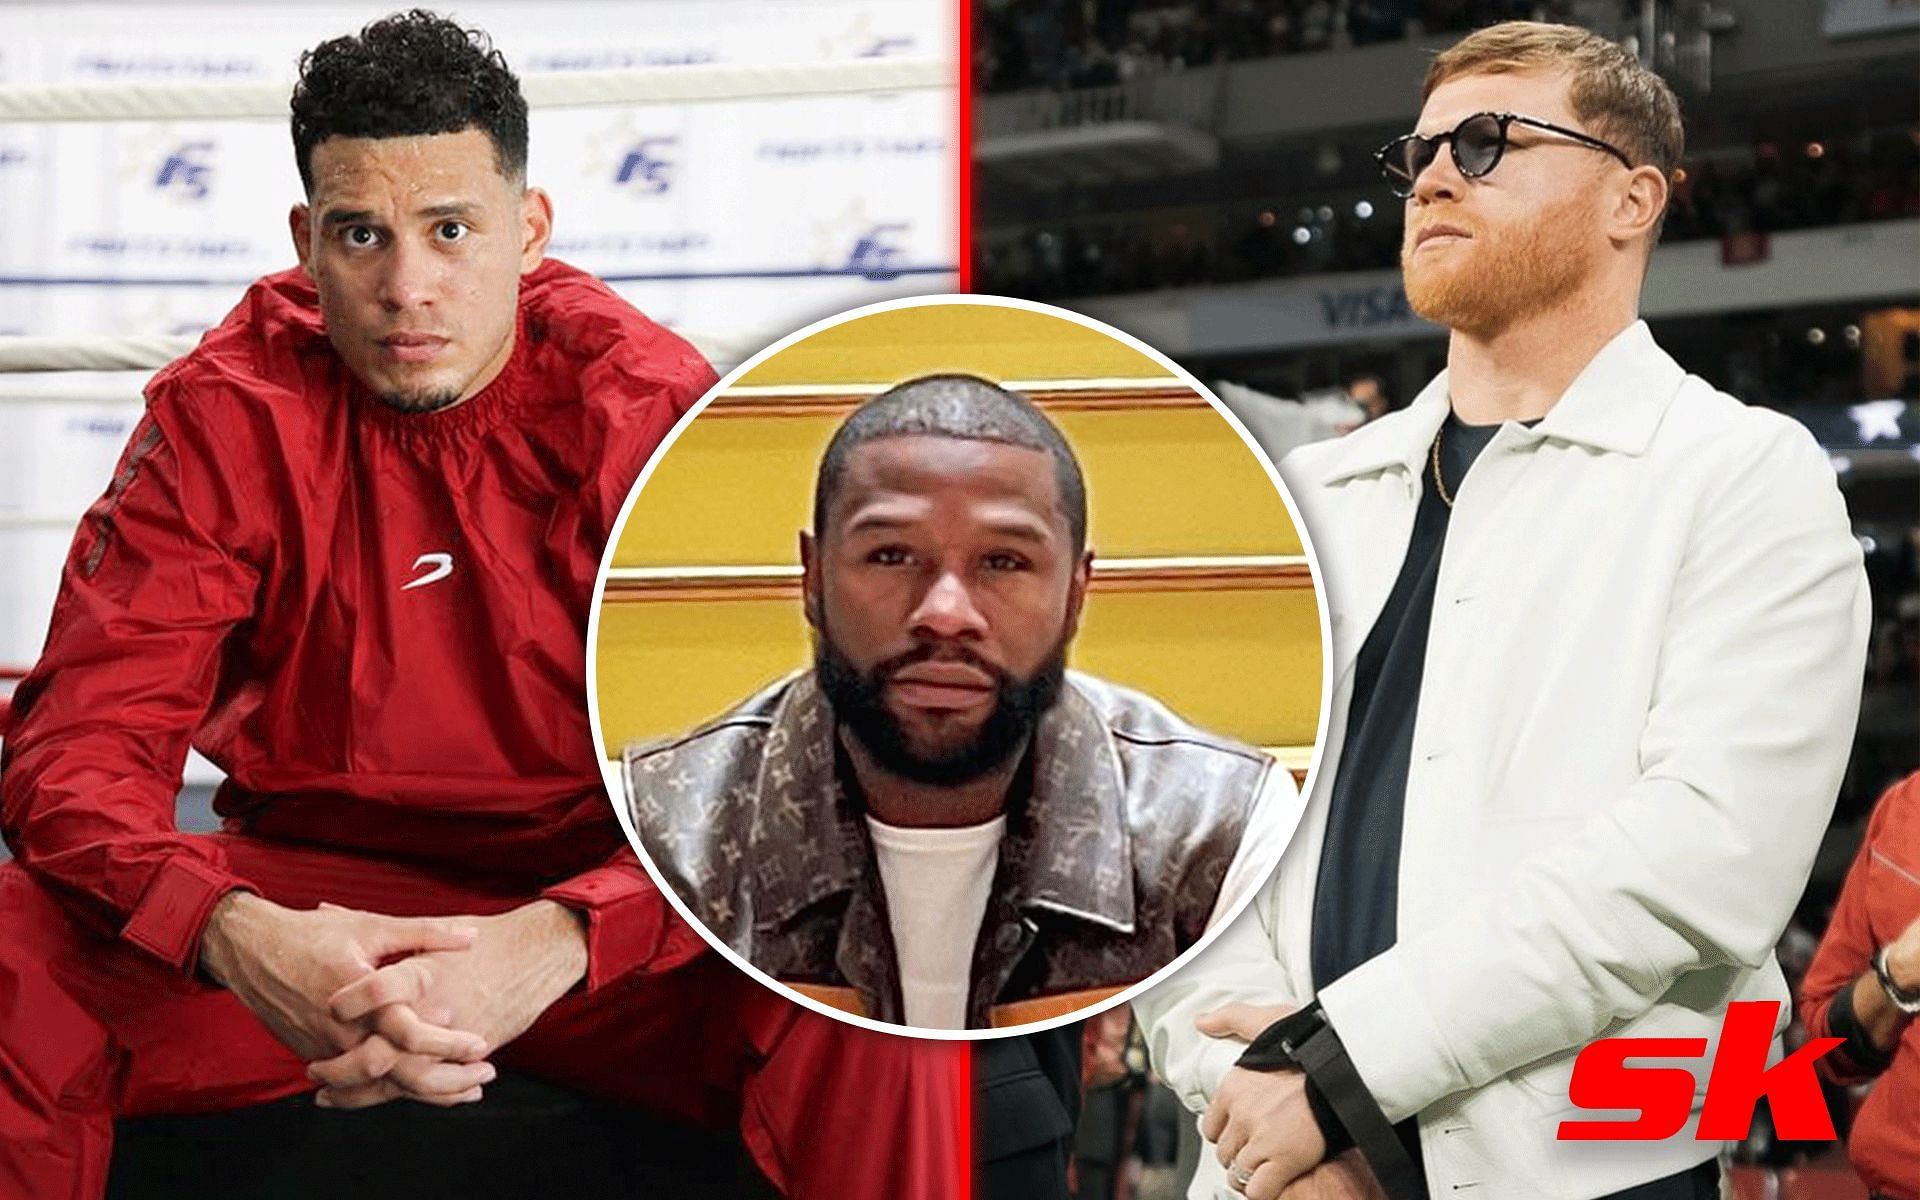 Floyd Maweather (middle) talks about the Canelo Alvarez (right) and David Benavidez (left) situation [Image via: @benavidez300, @floydmayweather and @canelo on Instagram] 